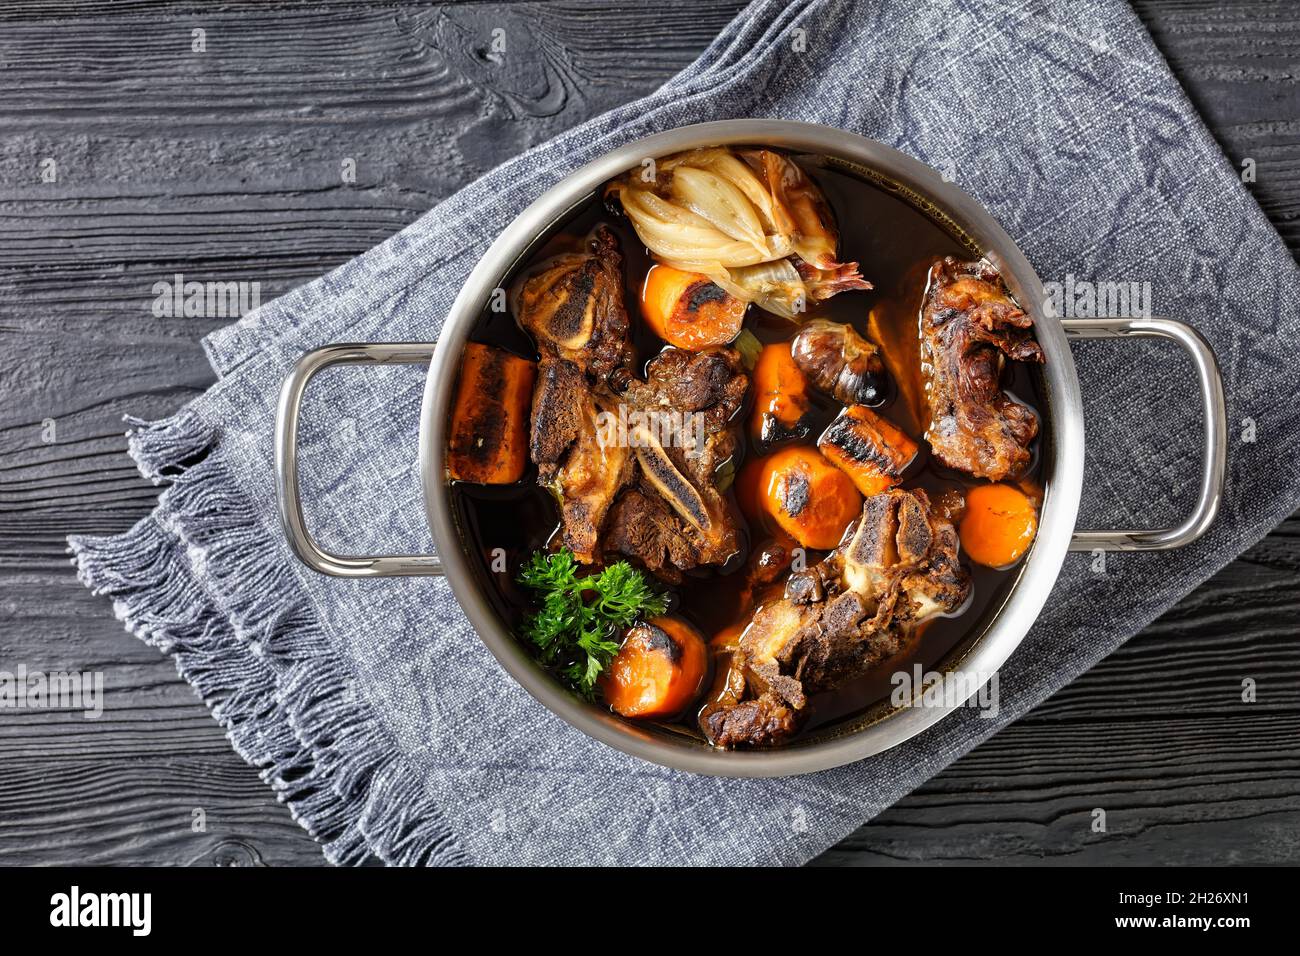 beef broth of beef meat on bones slow cooked with charred vegetables: carrot, onion, garlic, and spices served in a pot on a wooden table, top view, f Stock Photo